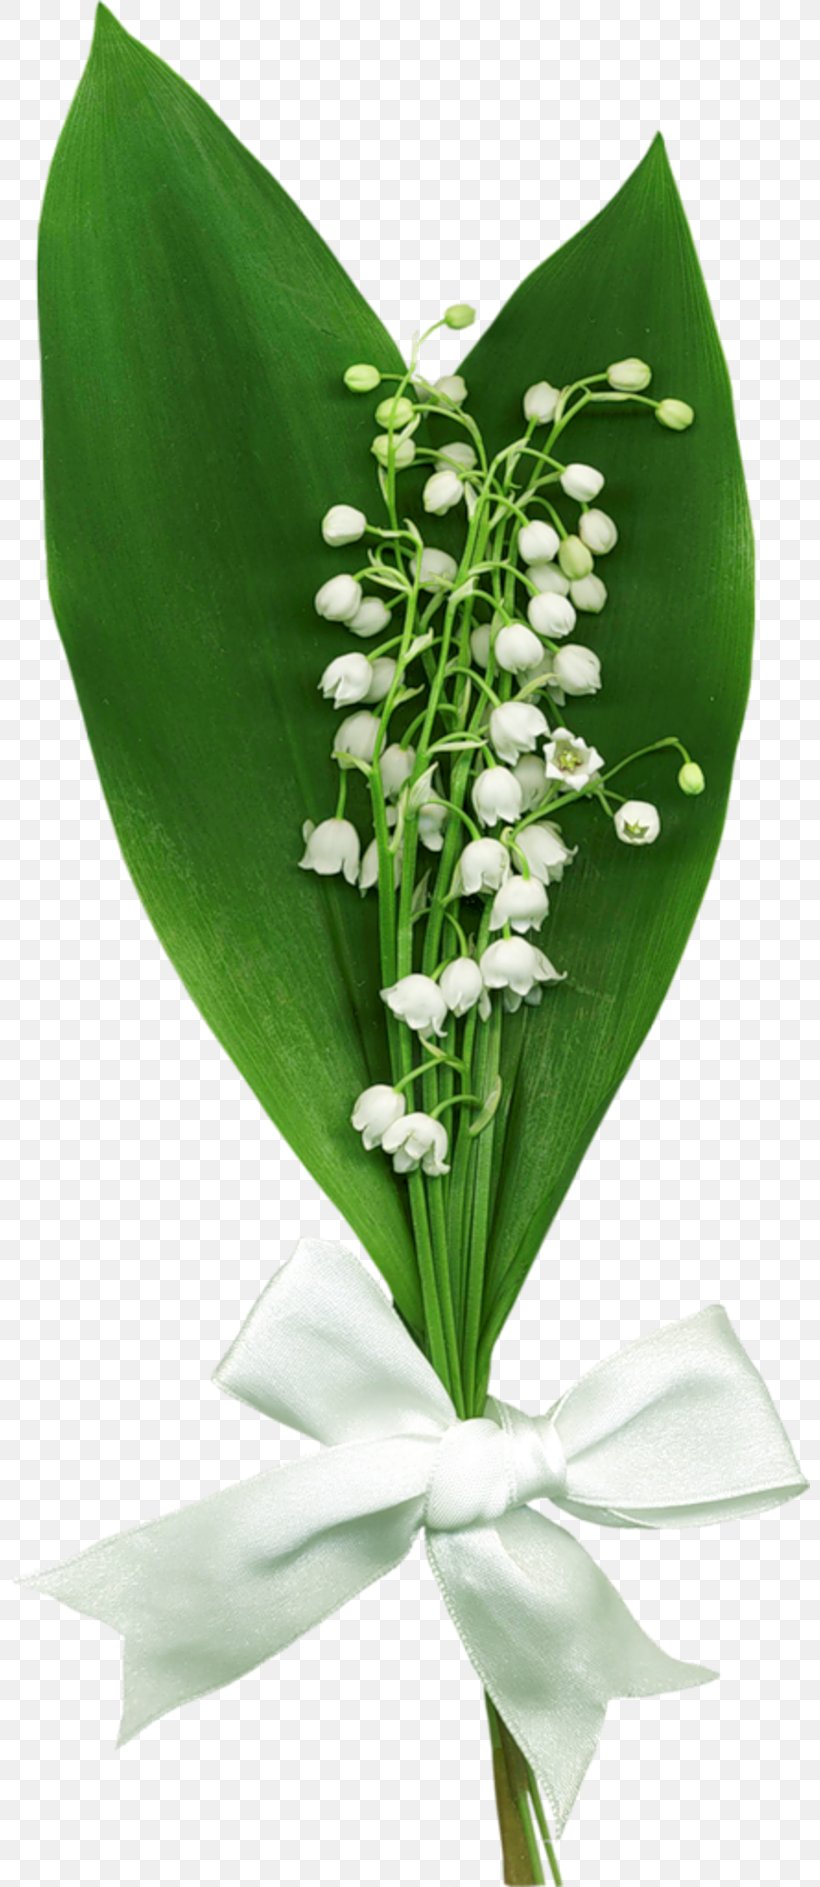 Lily Of The Valley Clip Art, PNG, 800x1887px, Lily Of The Valley, Animation, Convallaria, Cut Flowers, Floral Design Download Free